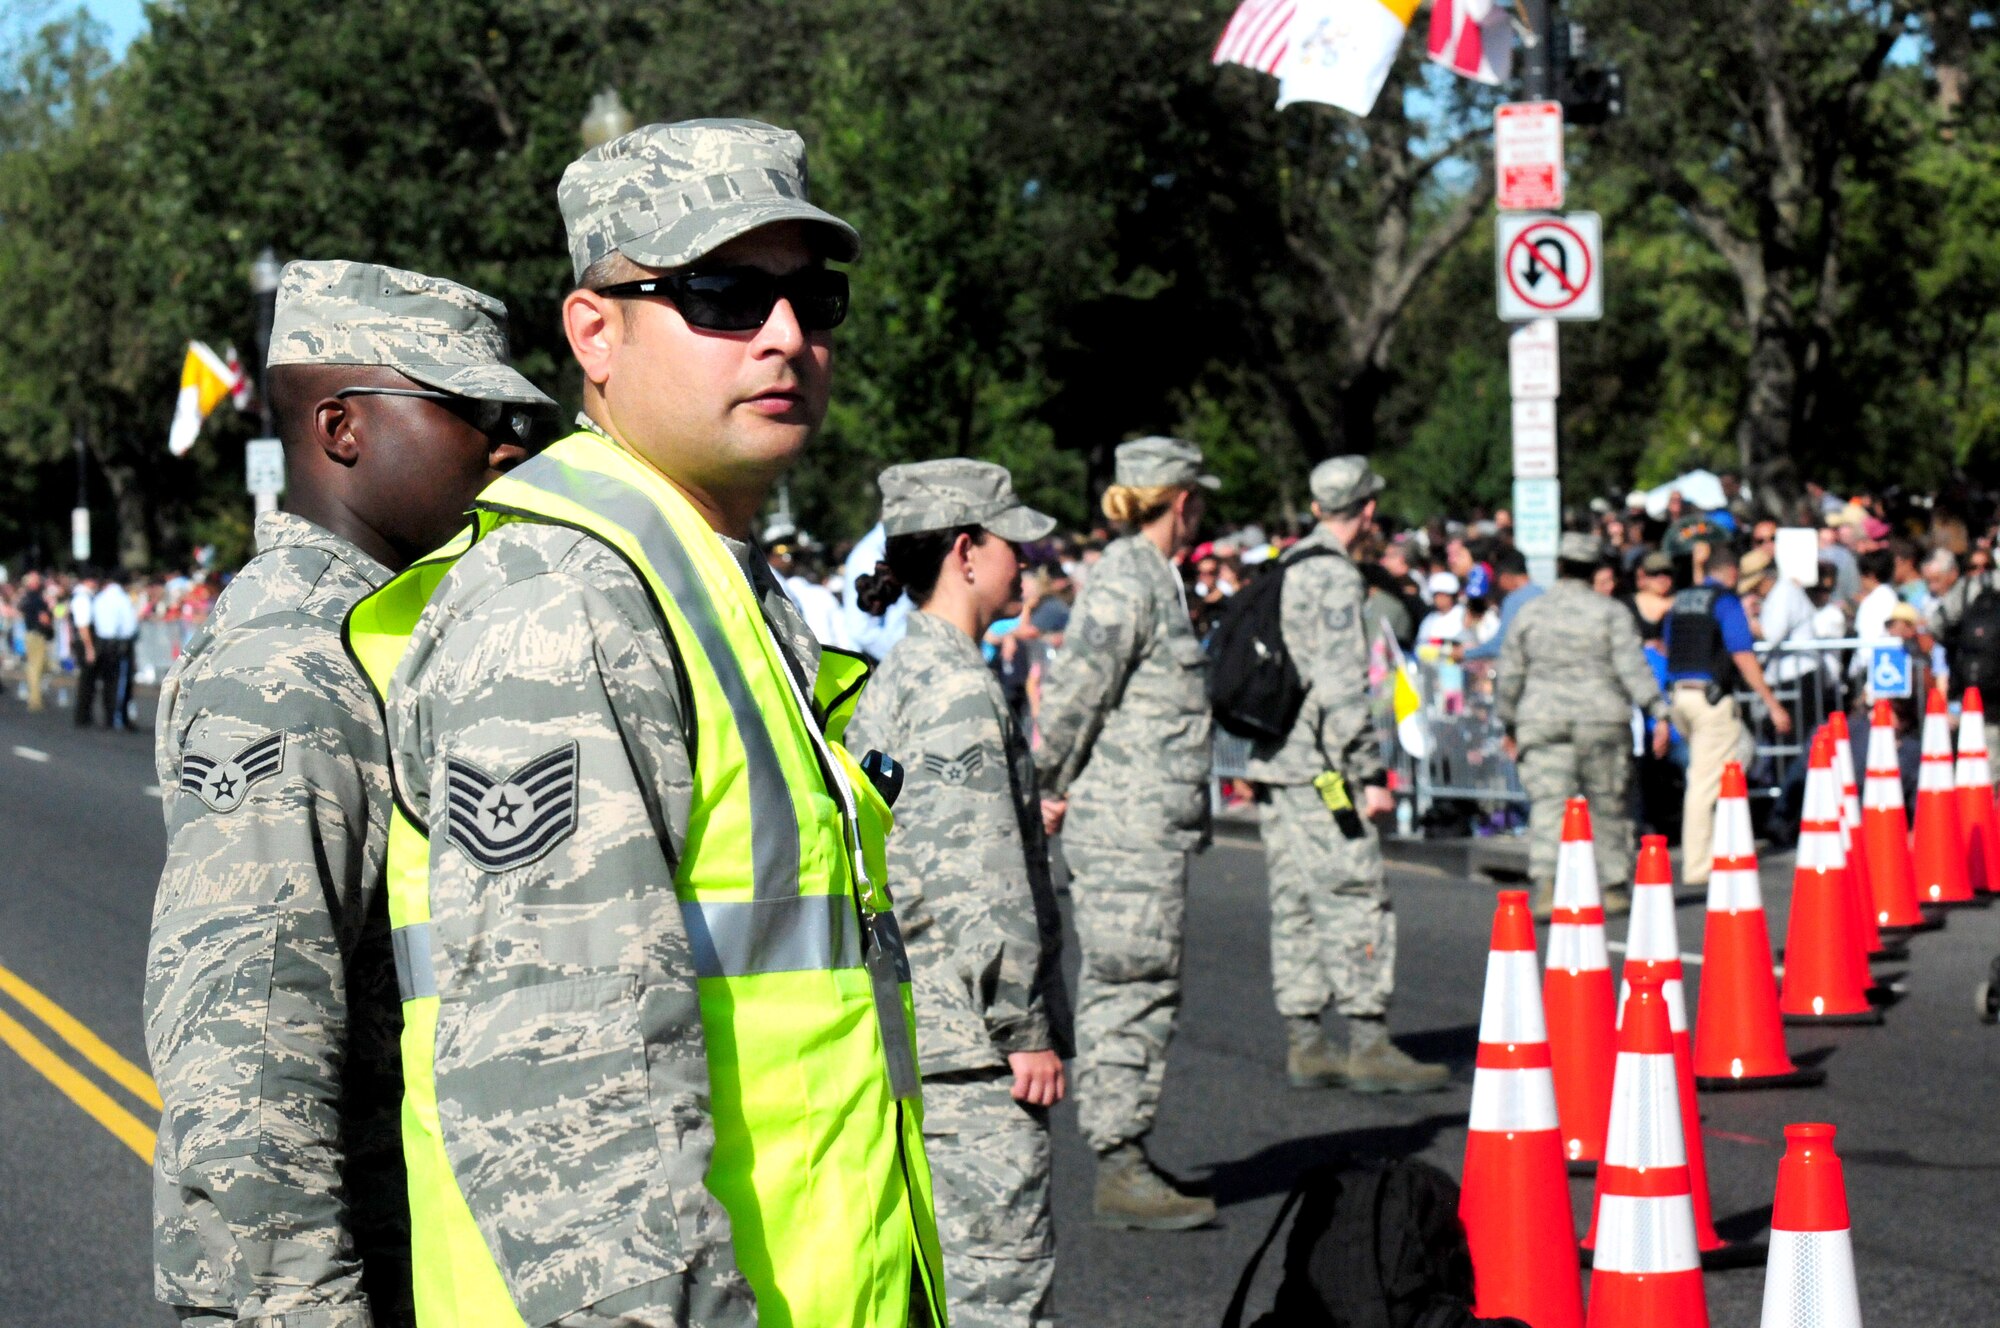 Tech. Sgt. William Johnson, 113th Legal Office paralegal, ensures crowd control at the 2015 Papal Visit in Washington, D.C., Sept. 23. More than 150 Airmen from the D.C. Air National Guard volunteered for the event providing crowd and traffic control. (U.S. Air National Guard photo by Senior Airman Erica Rodriguez)
